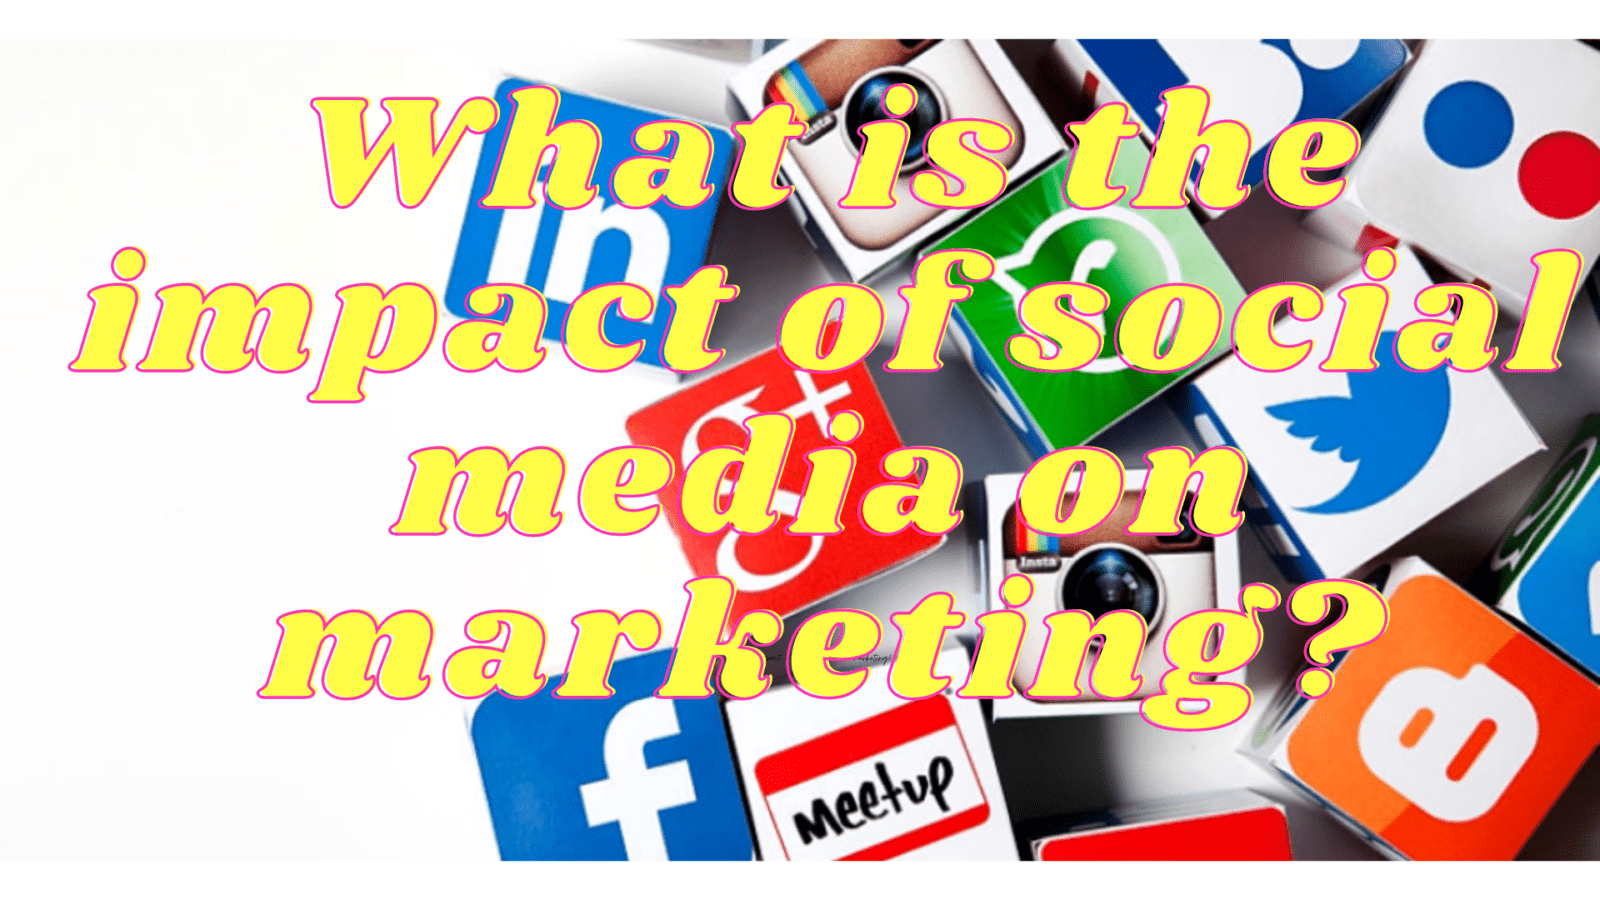 What is the impact of social media on marketing